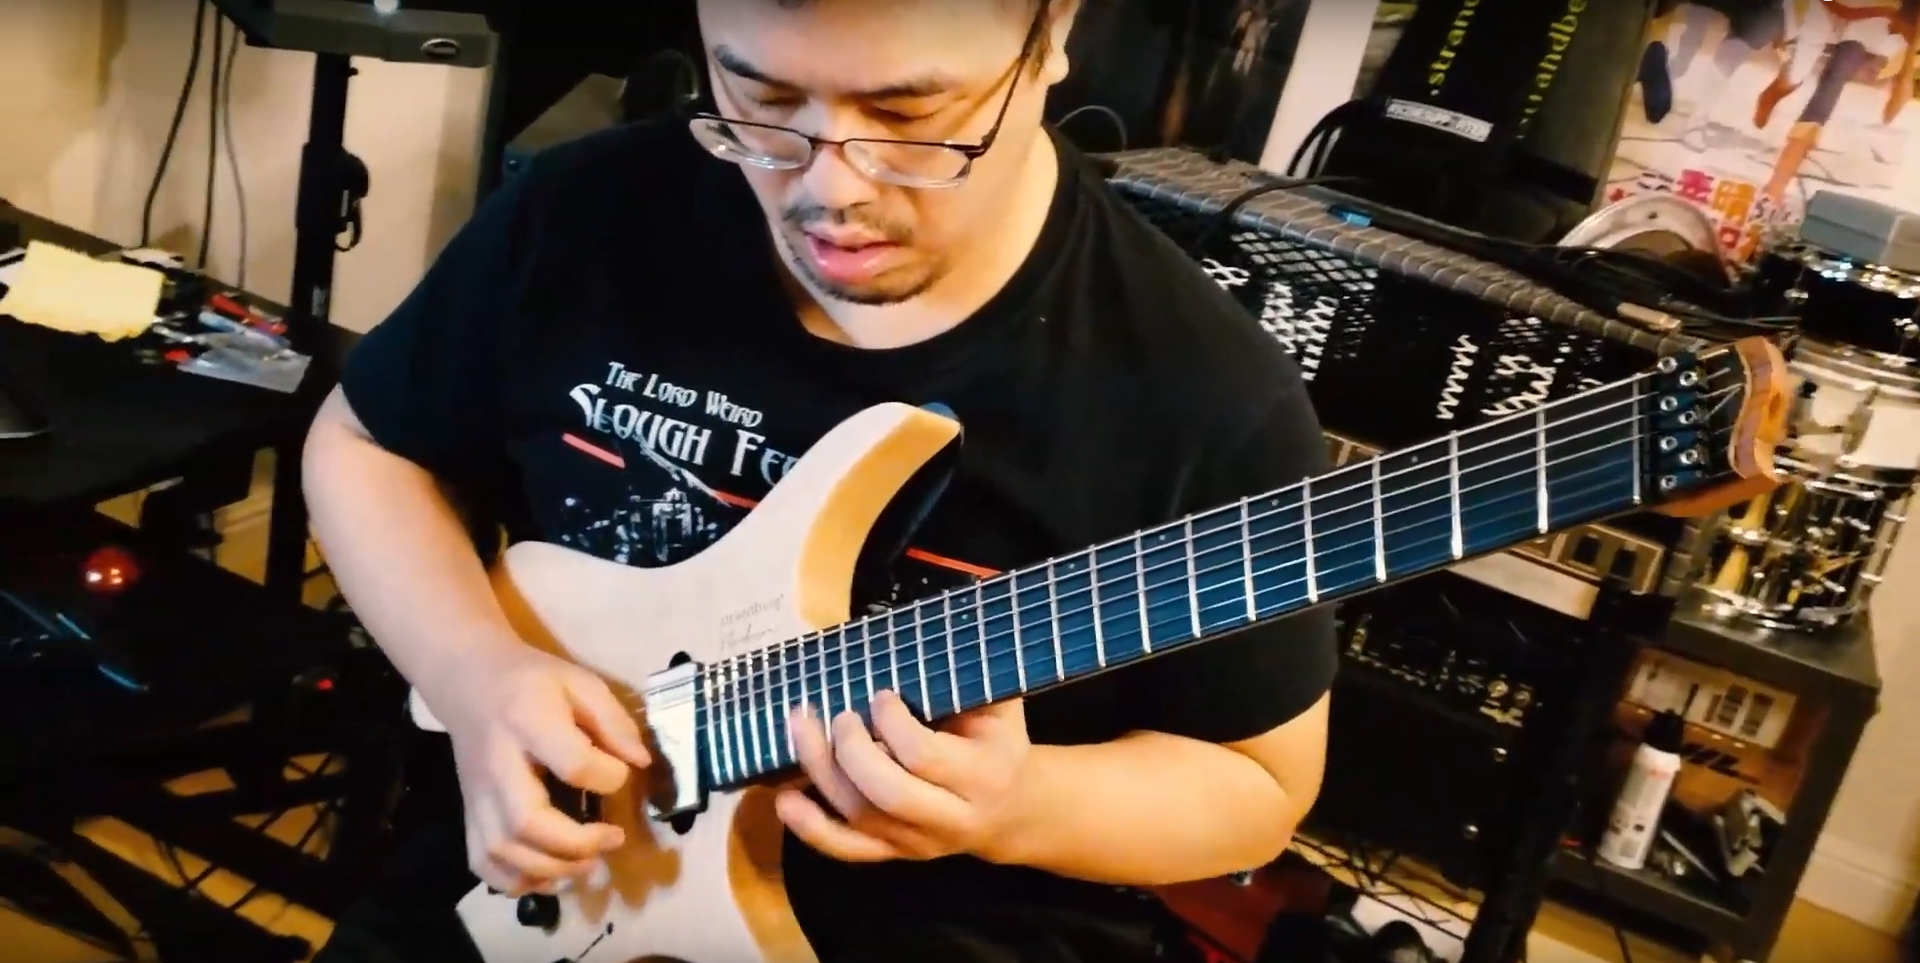 ANDREW LEE: New Noise Magazine Premieres “A Better Tomorrow” Playthrough; Heavy Metal Shrapnel Album By Ripped To Shreds Guitarist With Guests From Zealotry, Chtheilist, First Fragment, And Bodies Lay Broken Nears Release Via Nameless Grave Records